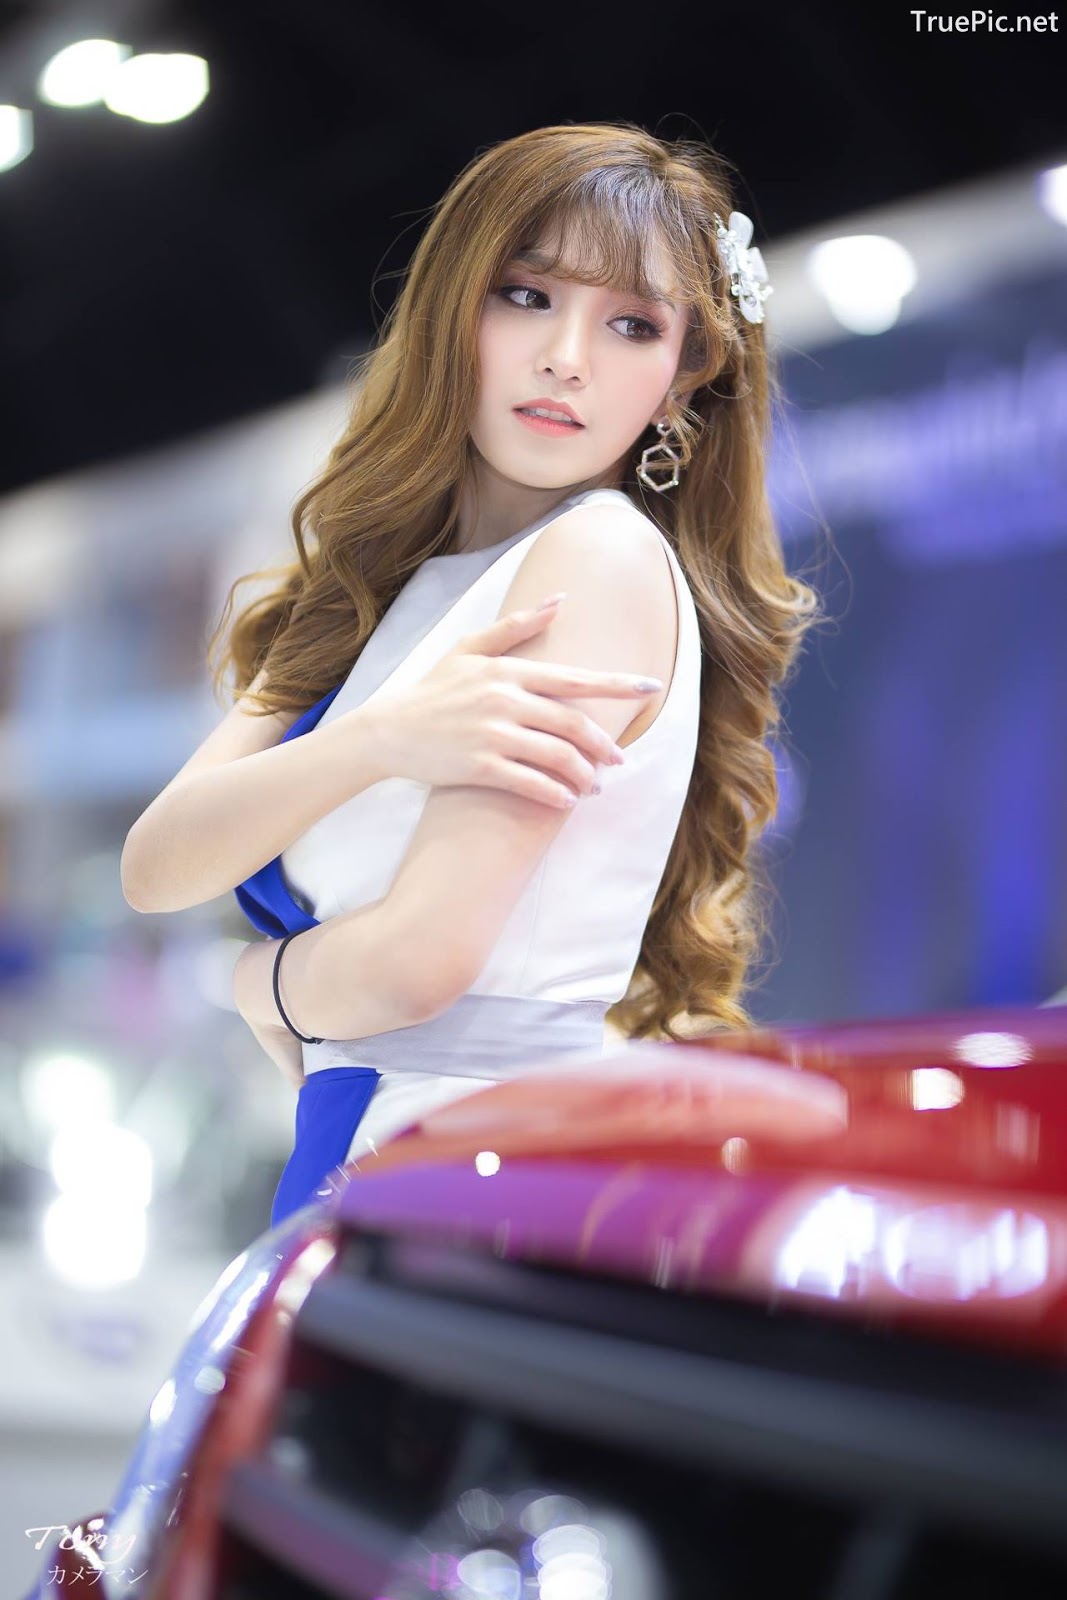 Image-Thailand-Hot-Model-Thai-Racing-Girl-At-Motor-Expo-2018-TruePic.net- Picture-77